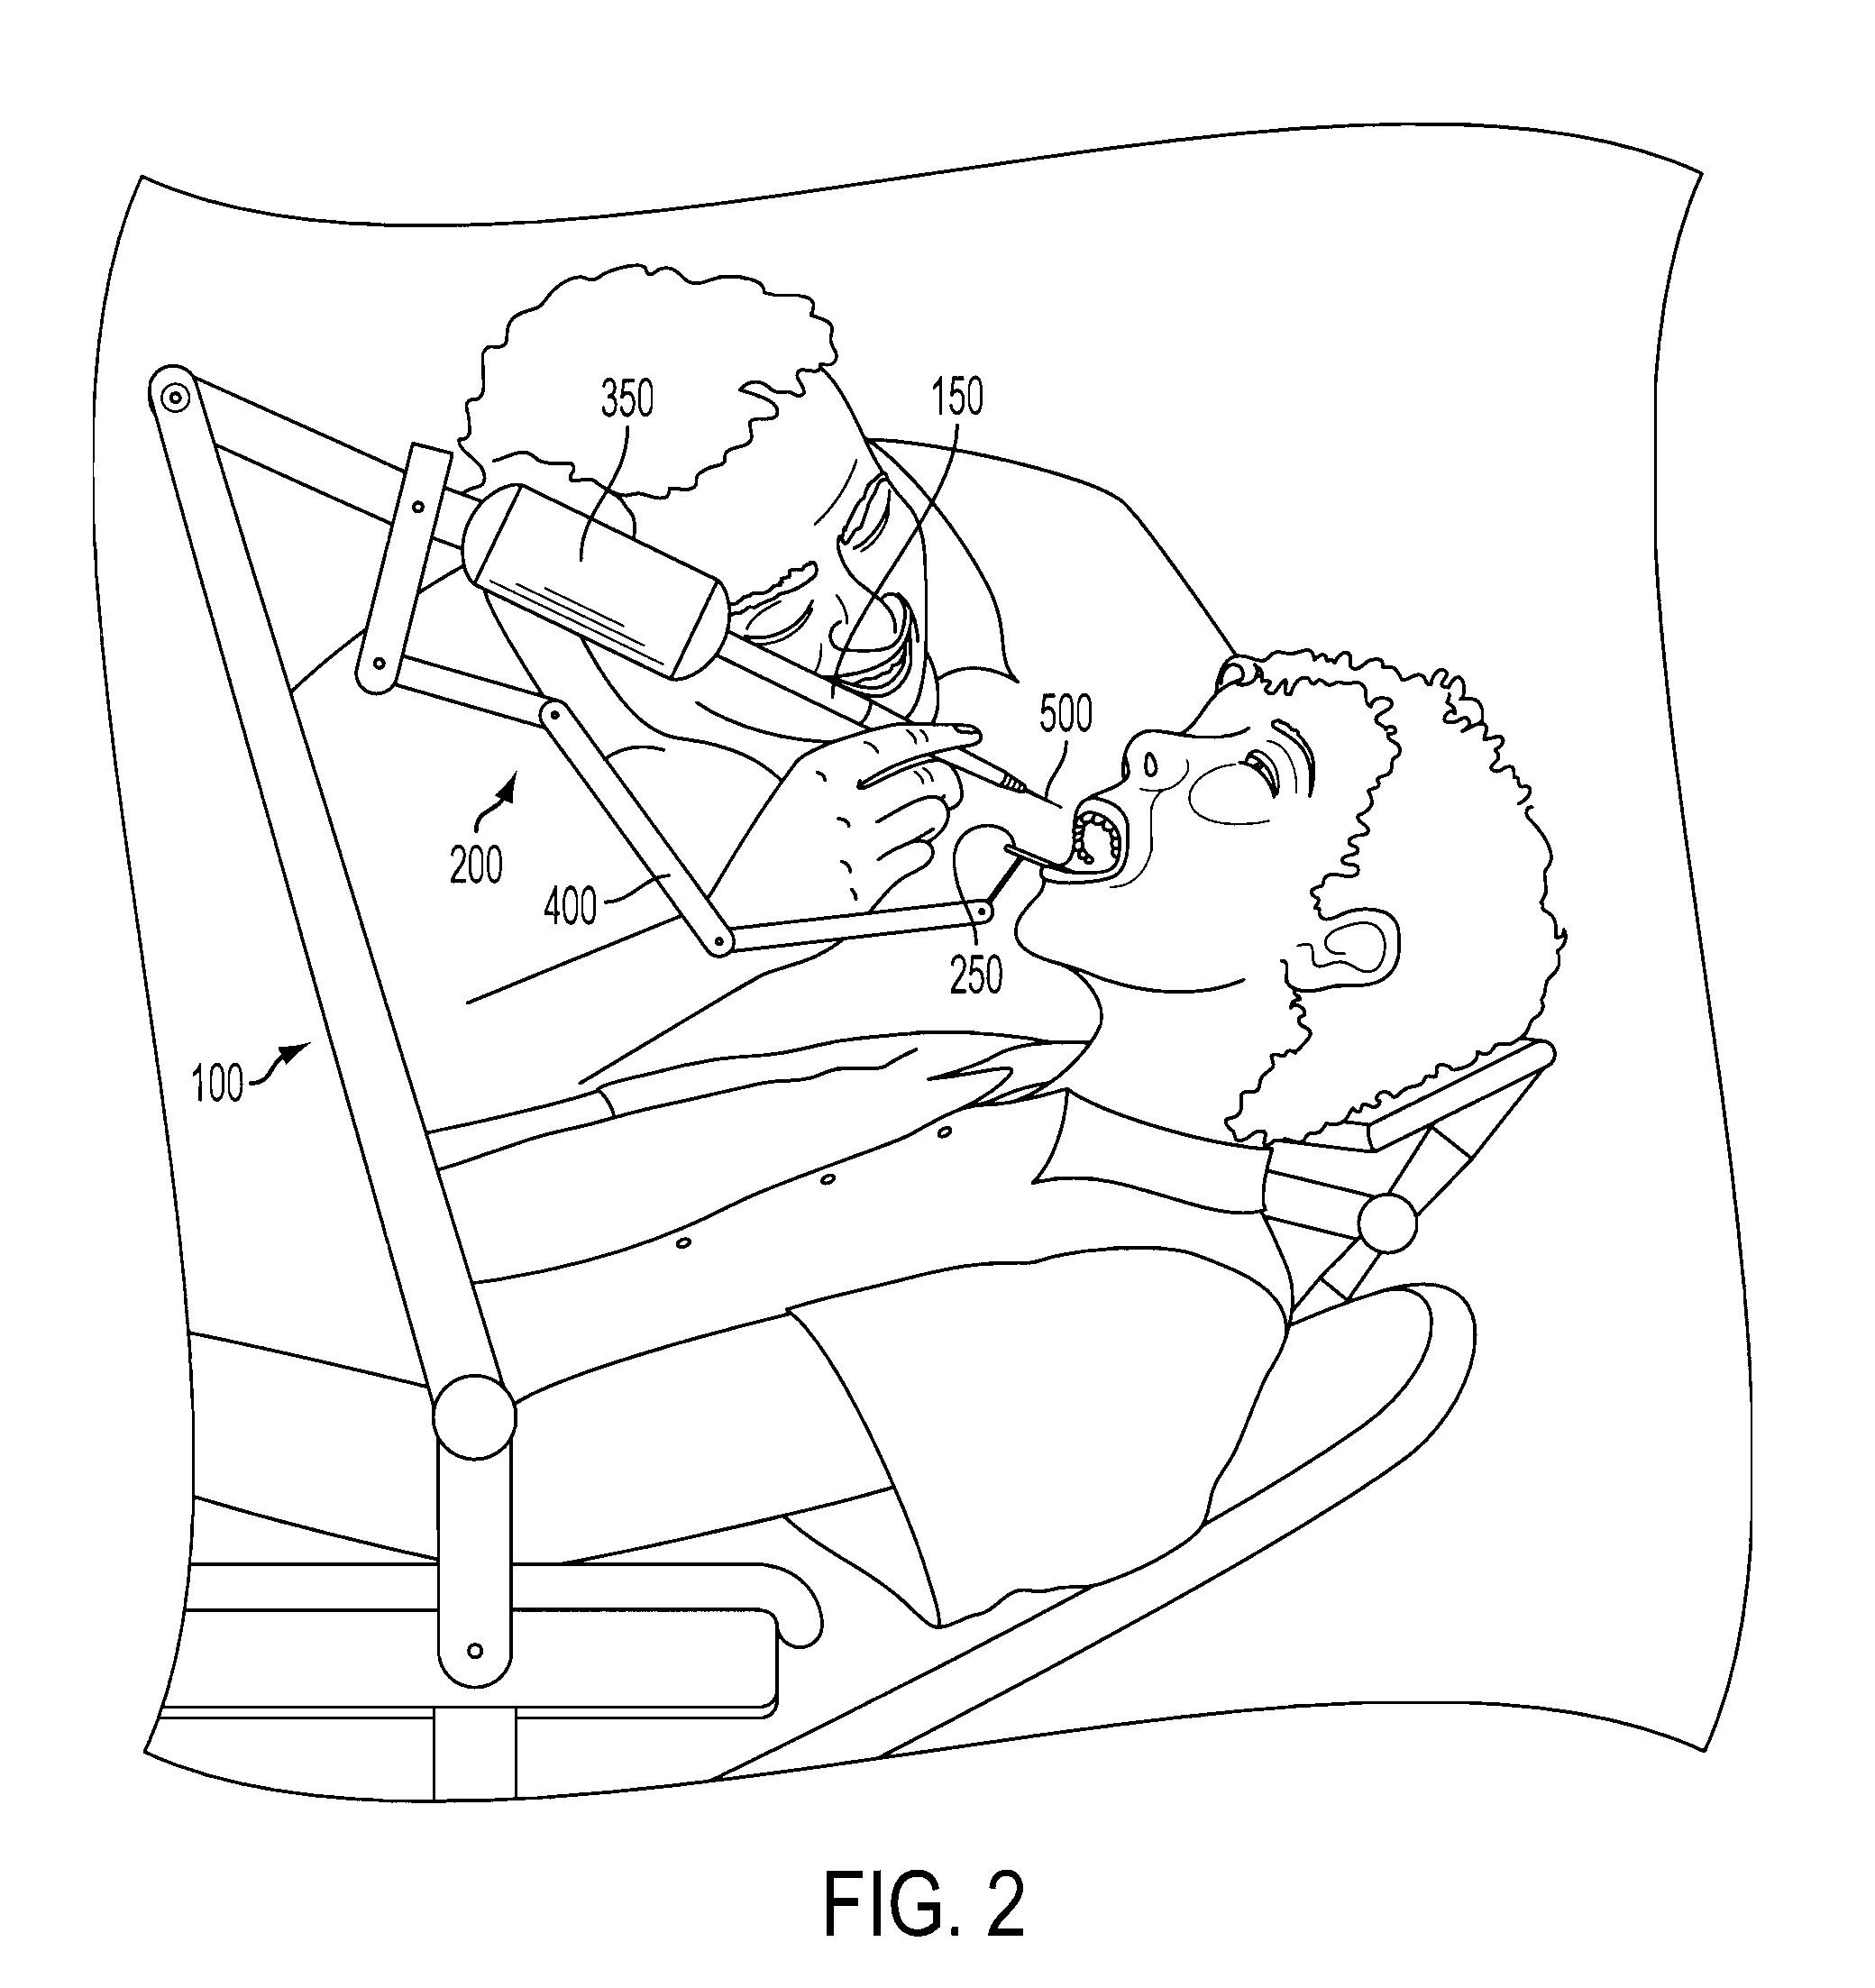 Guided dental implantation system and associated device and method